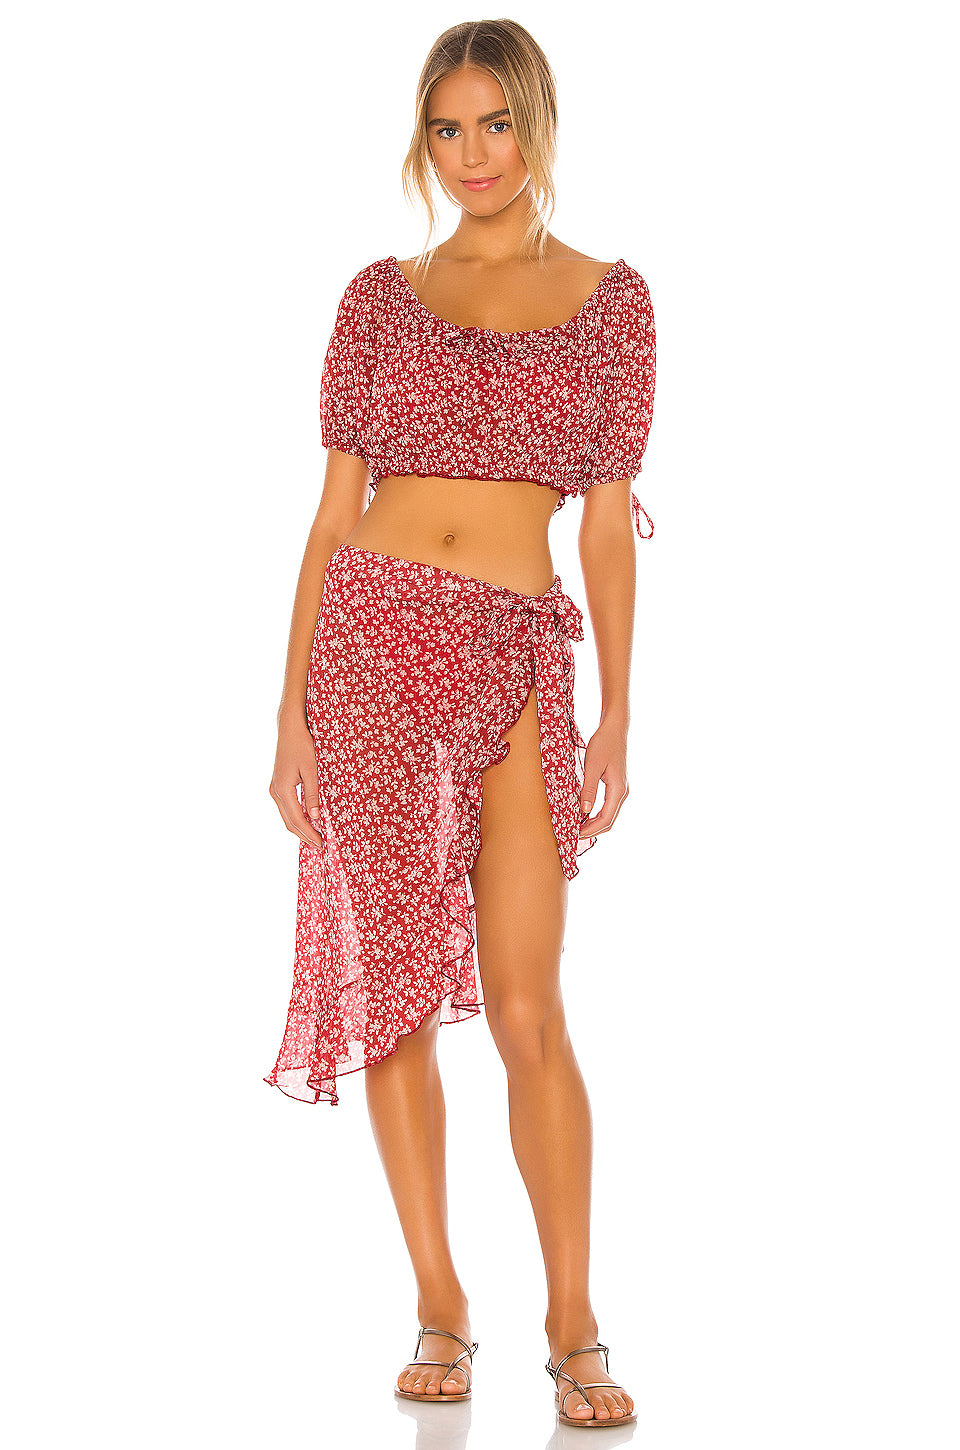 Solare Top in CHERRY FLORAL